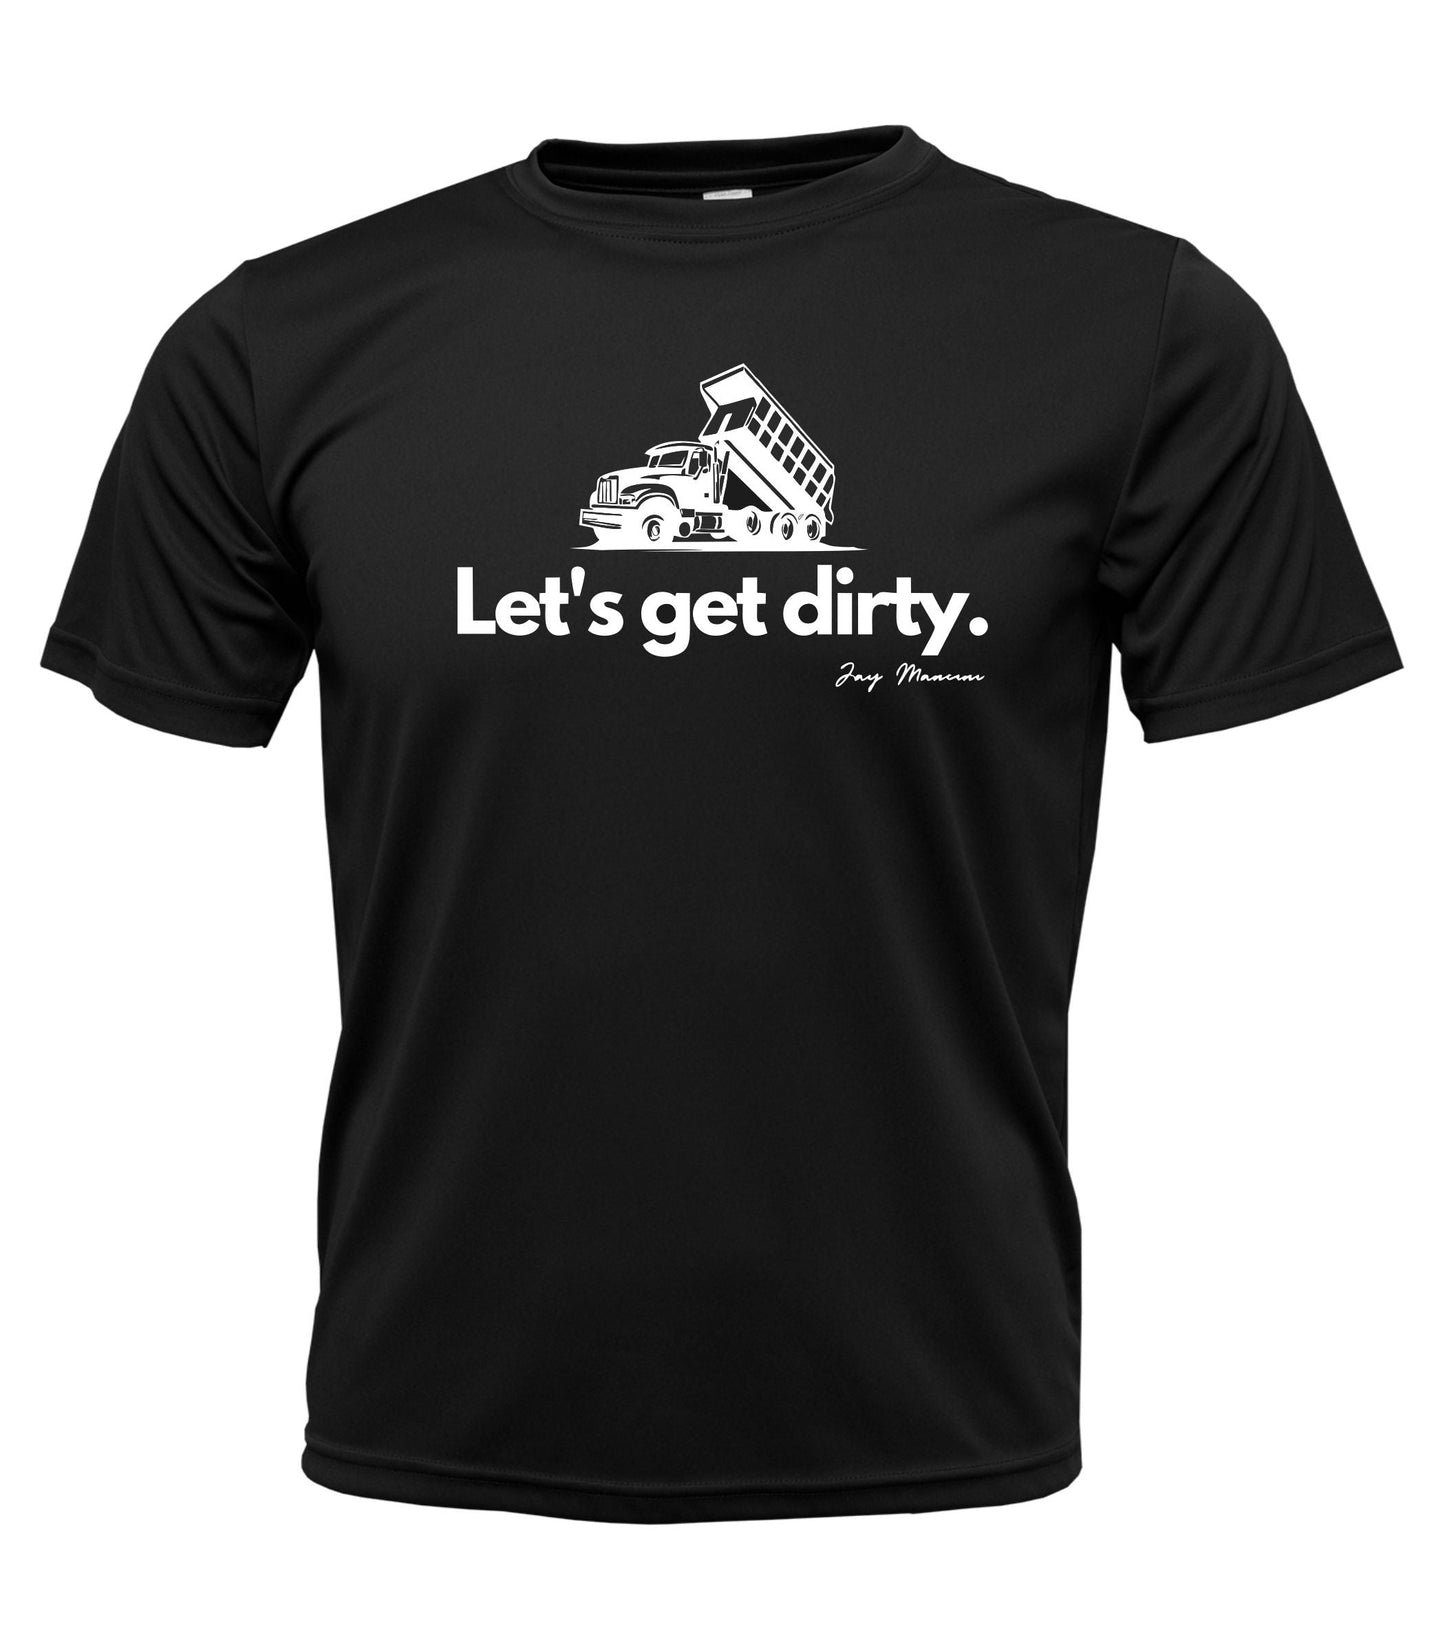 Let's get dirty - Dri-fit T-shirt